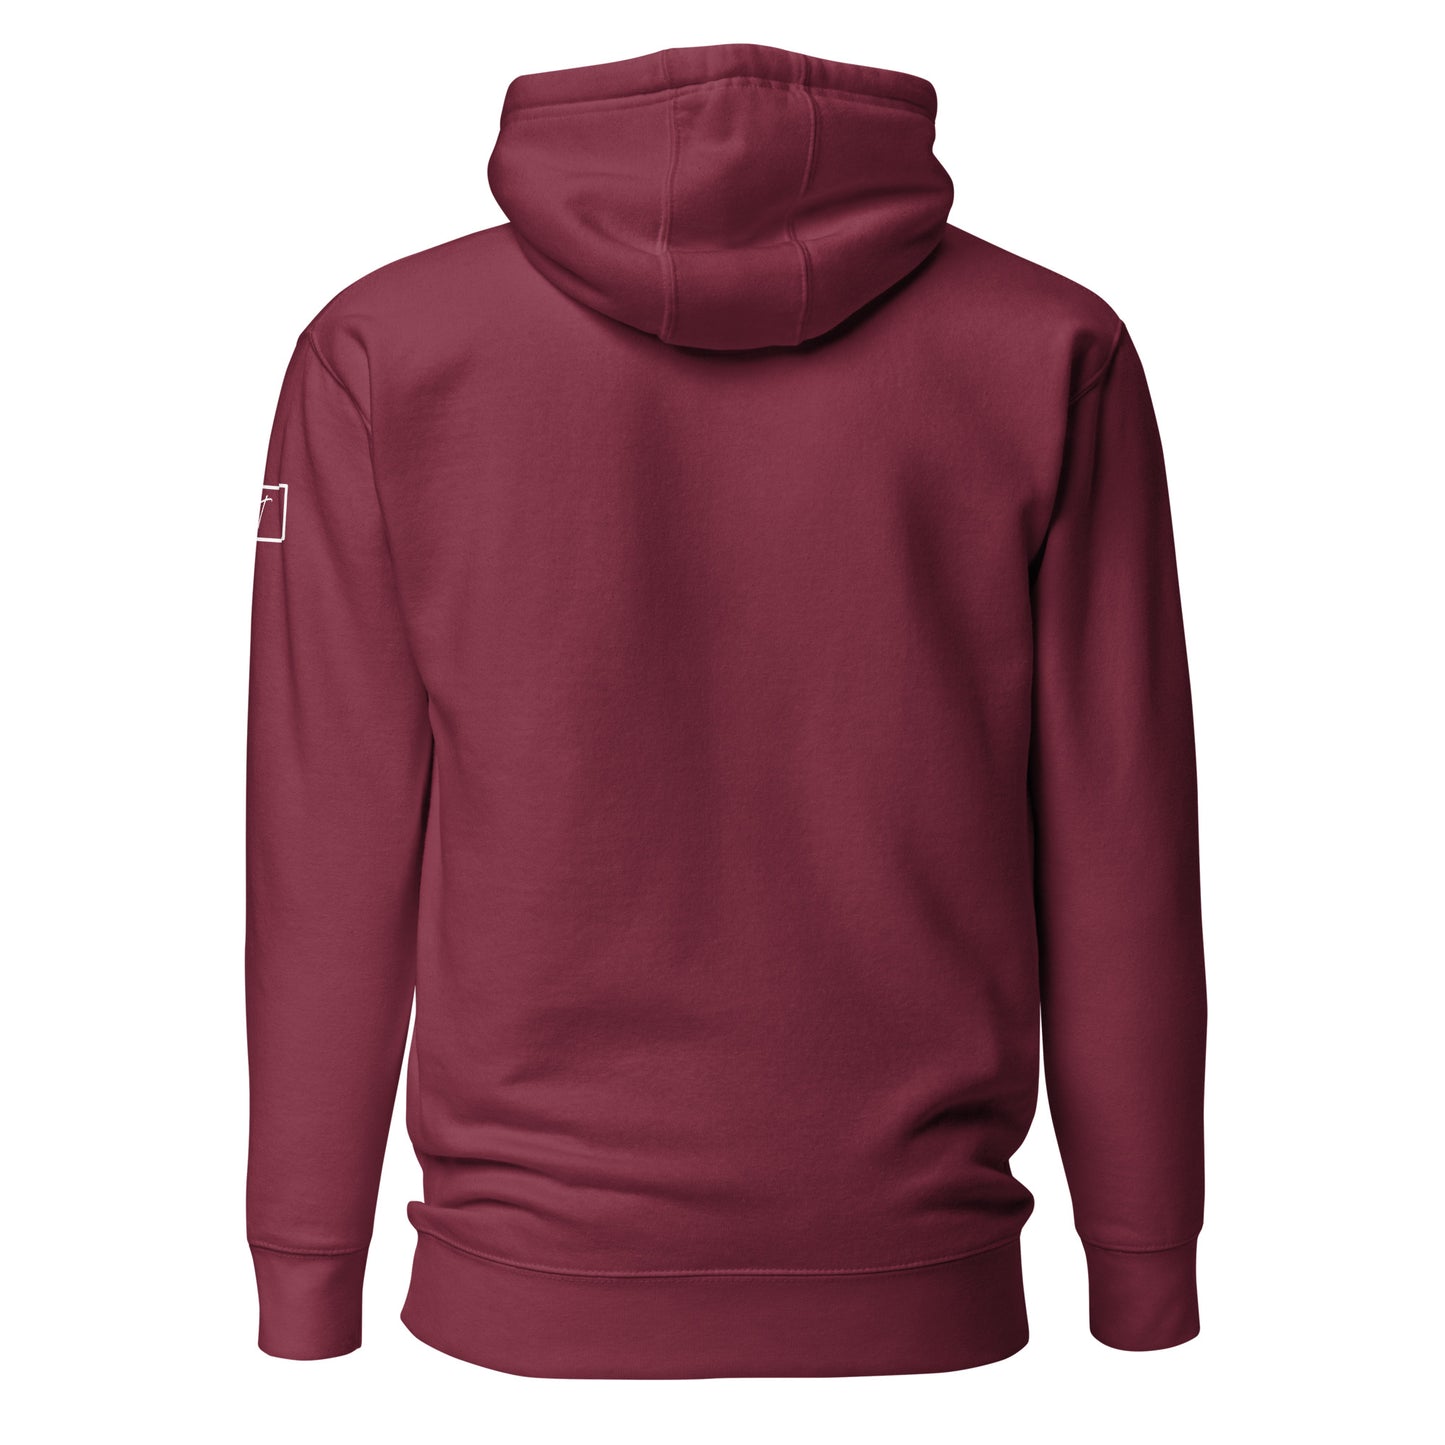 Back view of Storm Castle Peak in Custer Gallatin National Forest Montana Maroon Sweatshirt from Park Attire